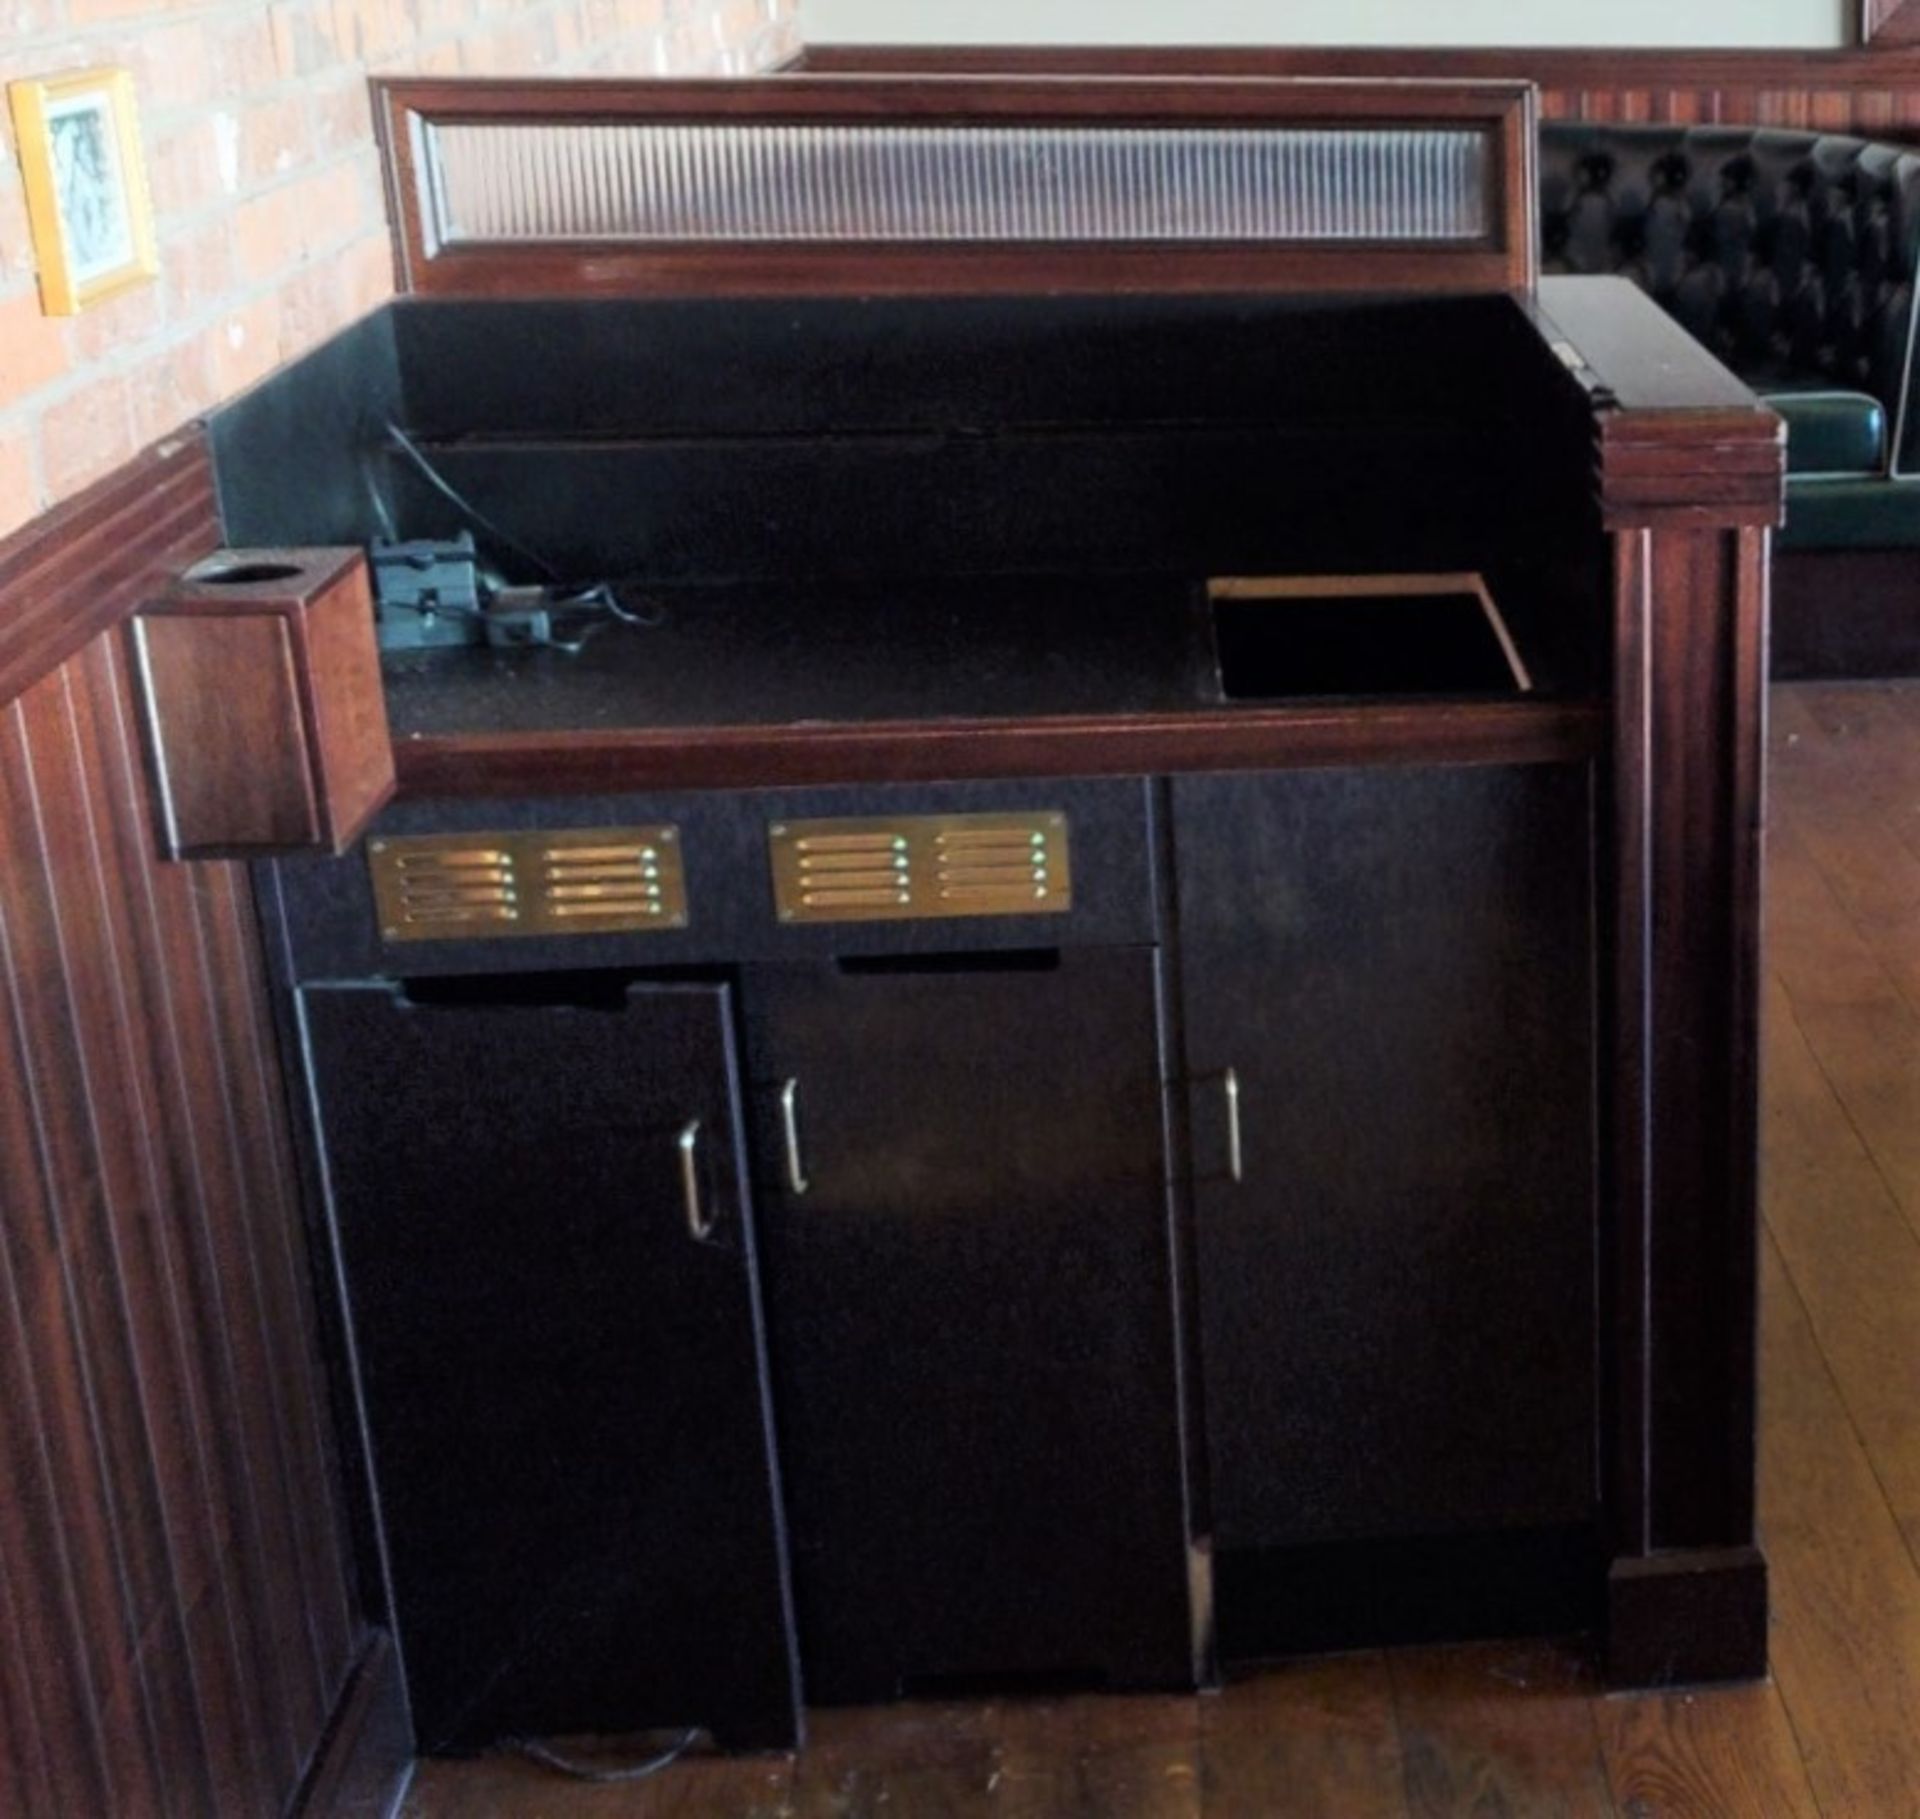 2 x Waiter Stations Featuring a Dark Wooden Finish, Menu Holders, Privacy Panels and Cupboards - - Image 5 of 8